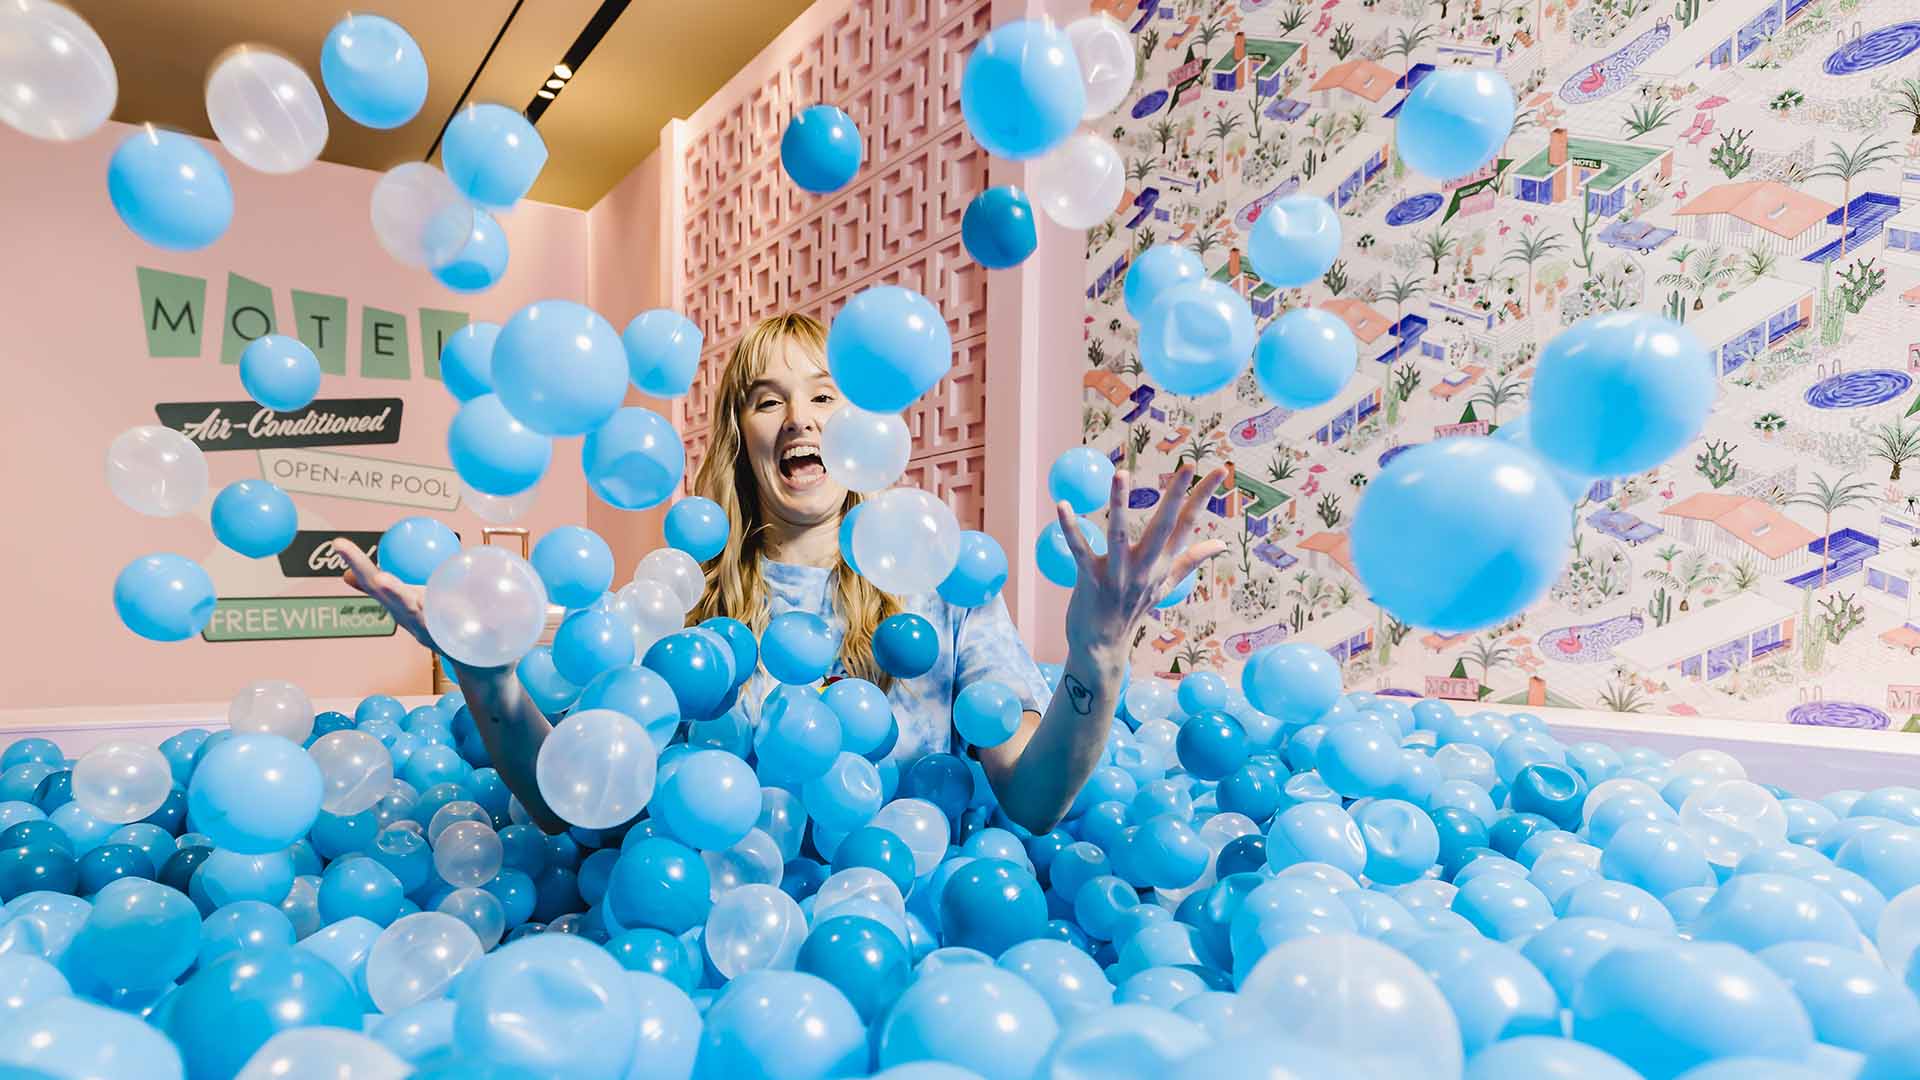 The Sugar Republic Team Is Launching Its Latest Super-Photogenic Installation in Brisbane This Month